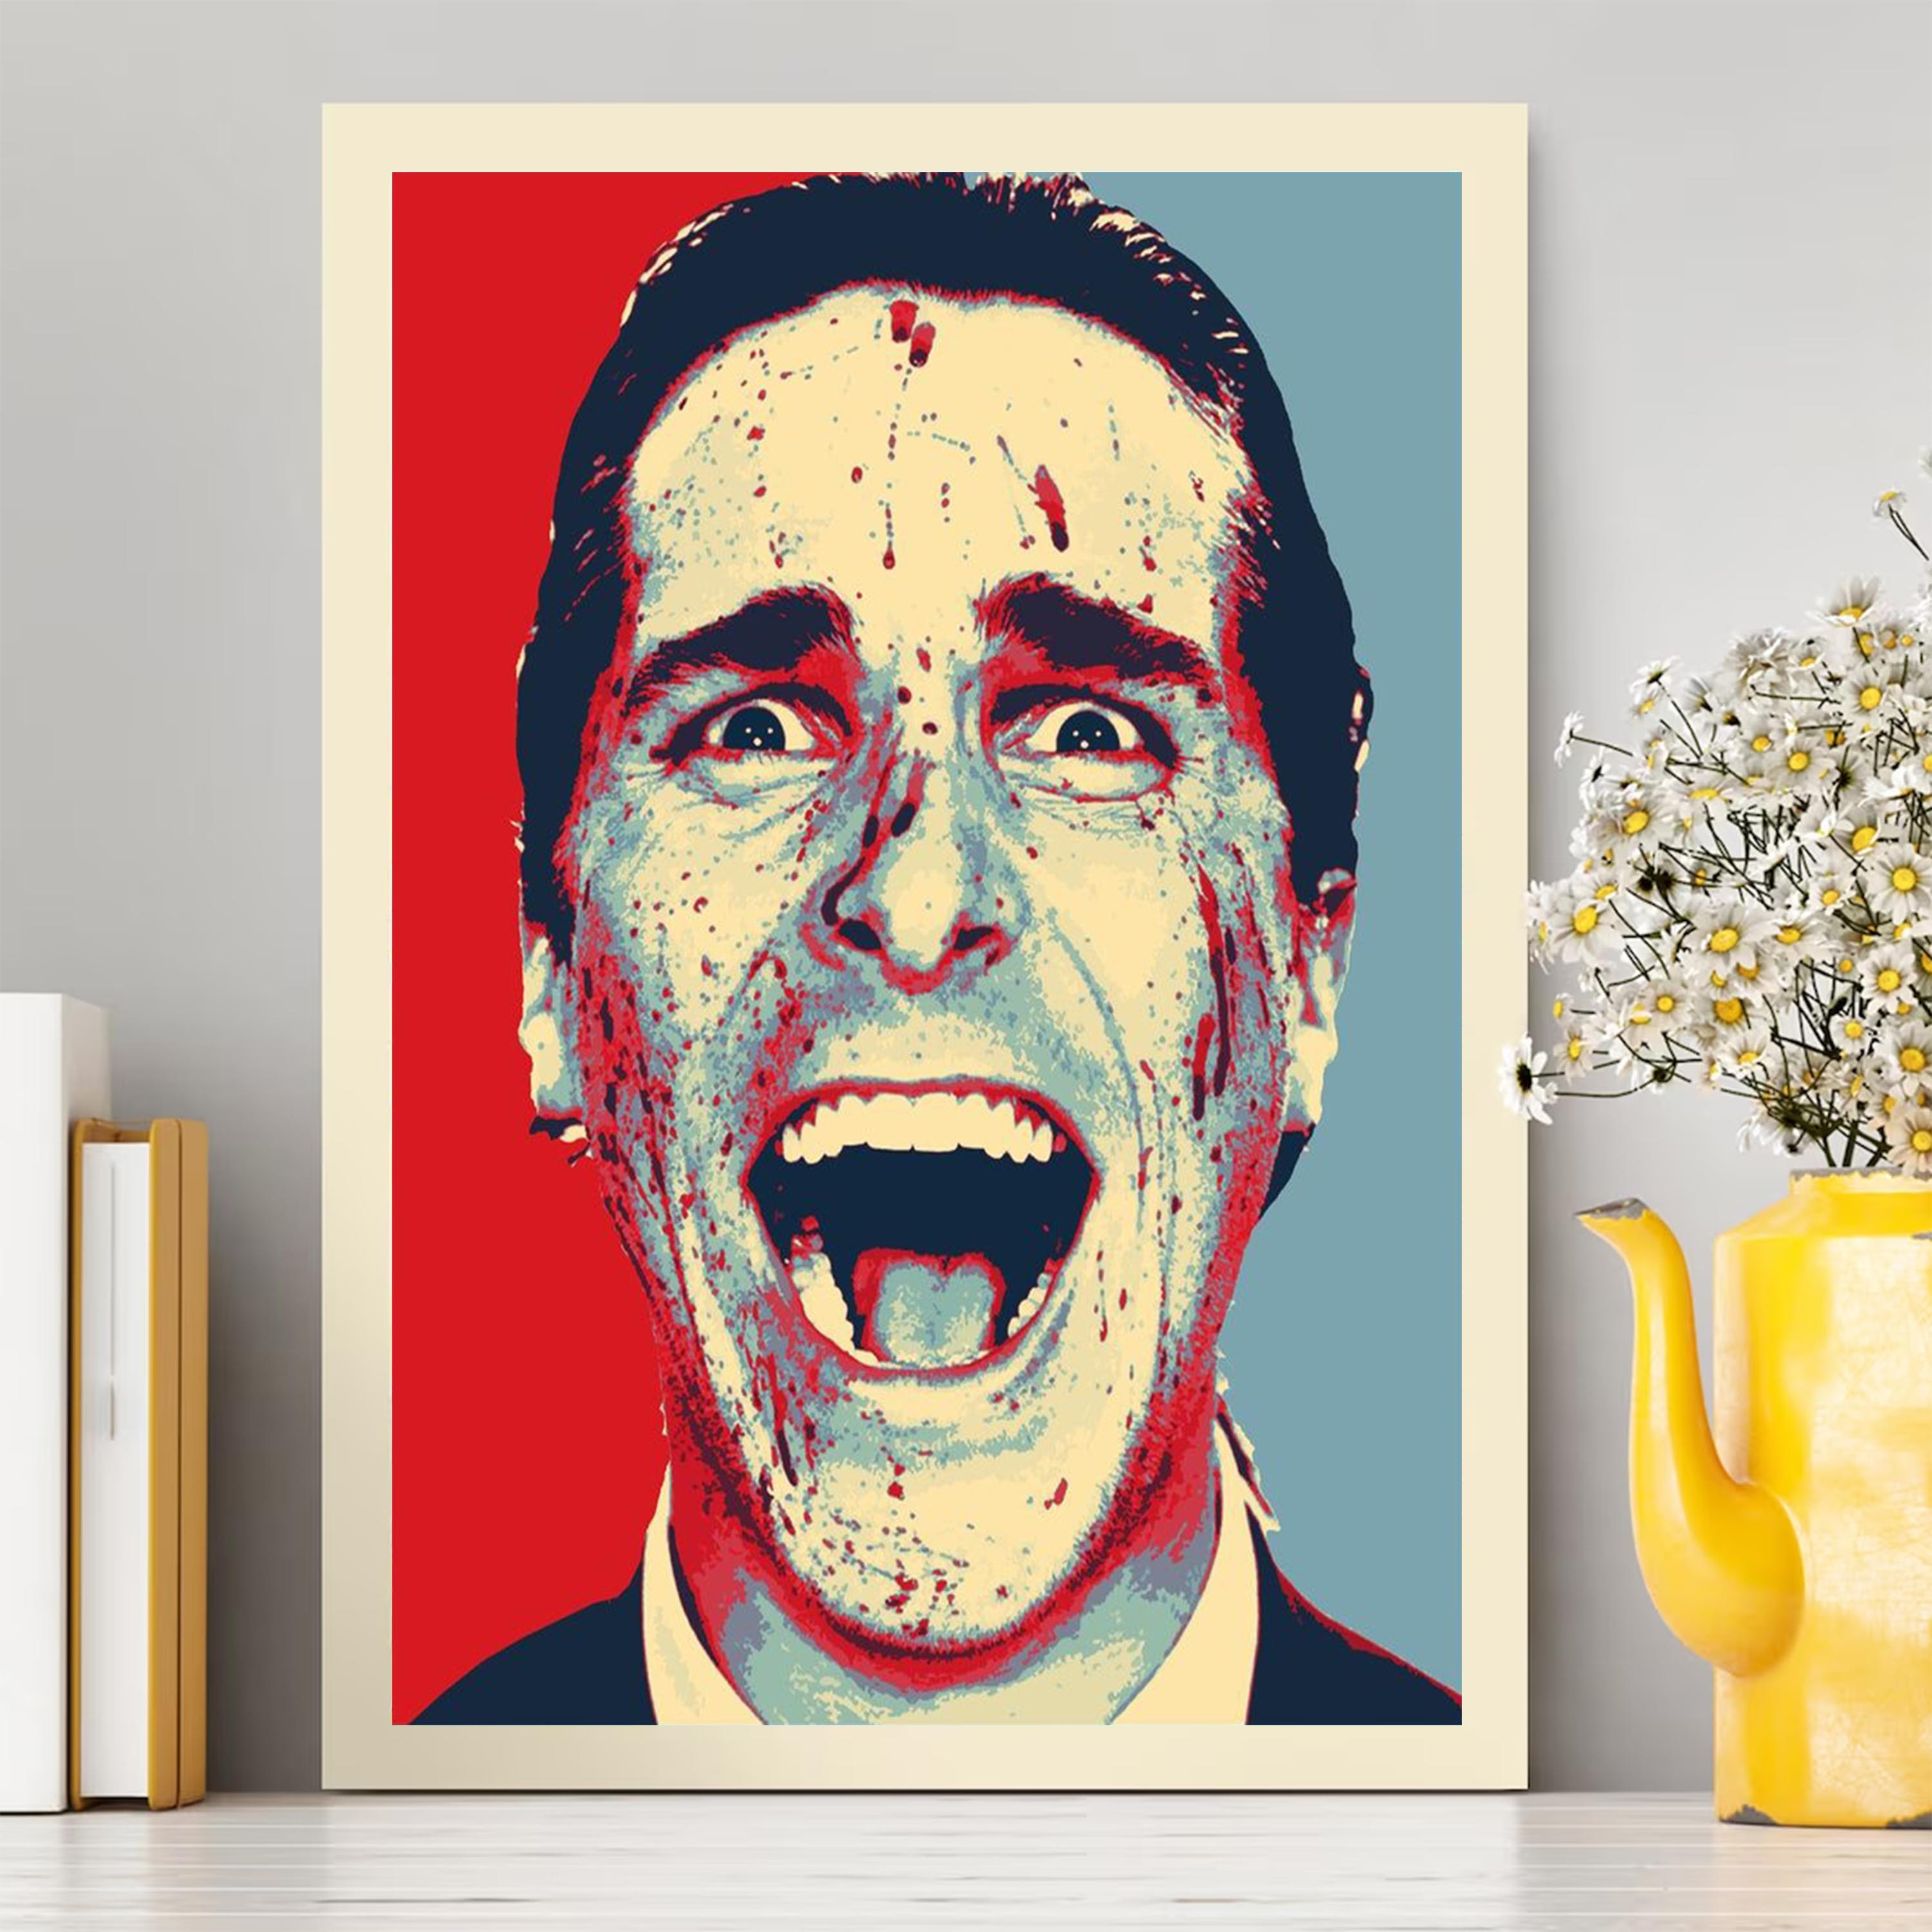 American Psycho Poster Vintage Movie Posters Fight Club Wall Art 90s  Classic Film Pictures for Bedroom Wall Decor Unframed 16x24 inch